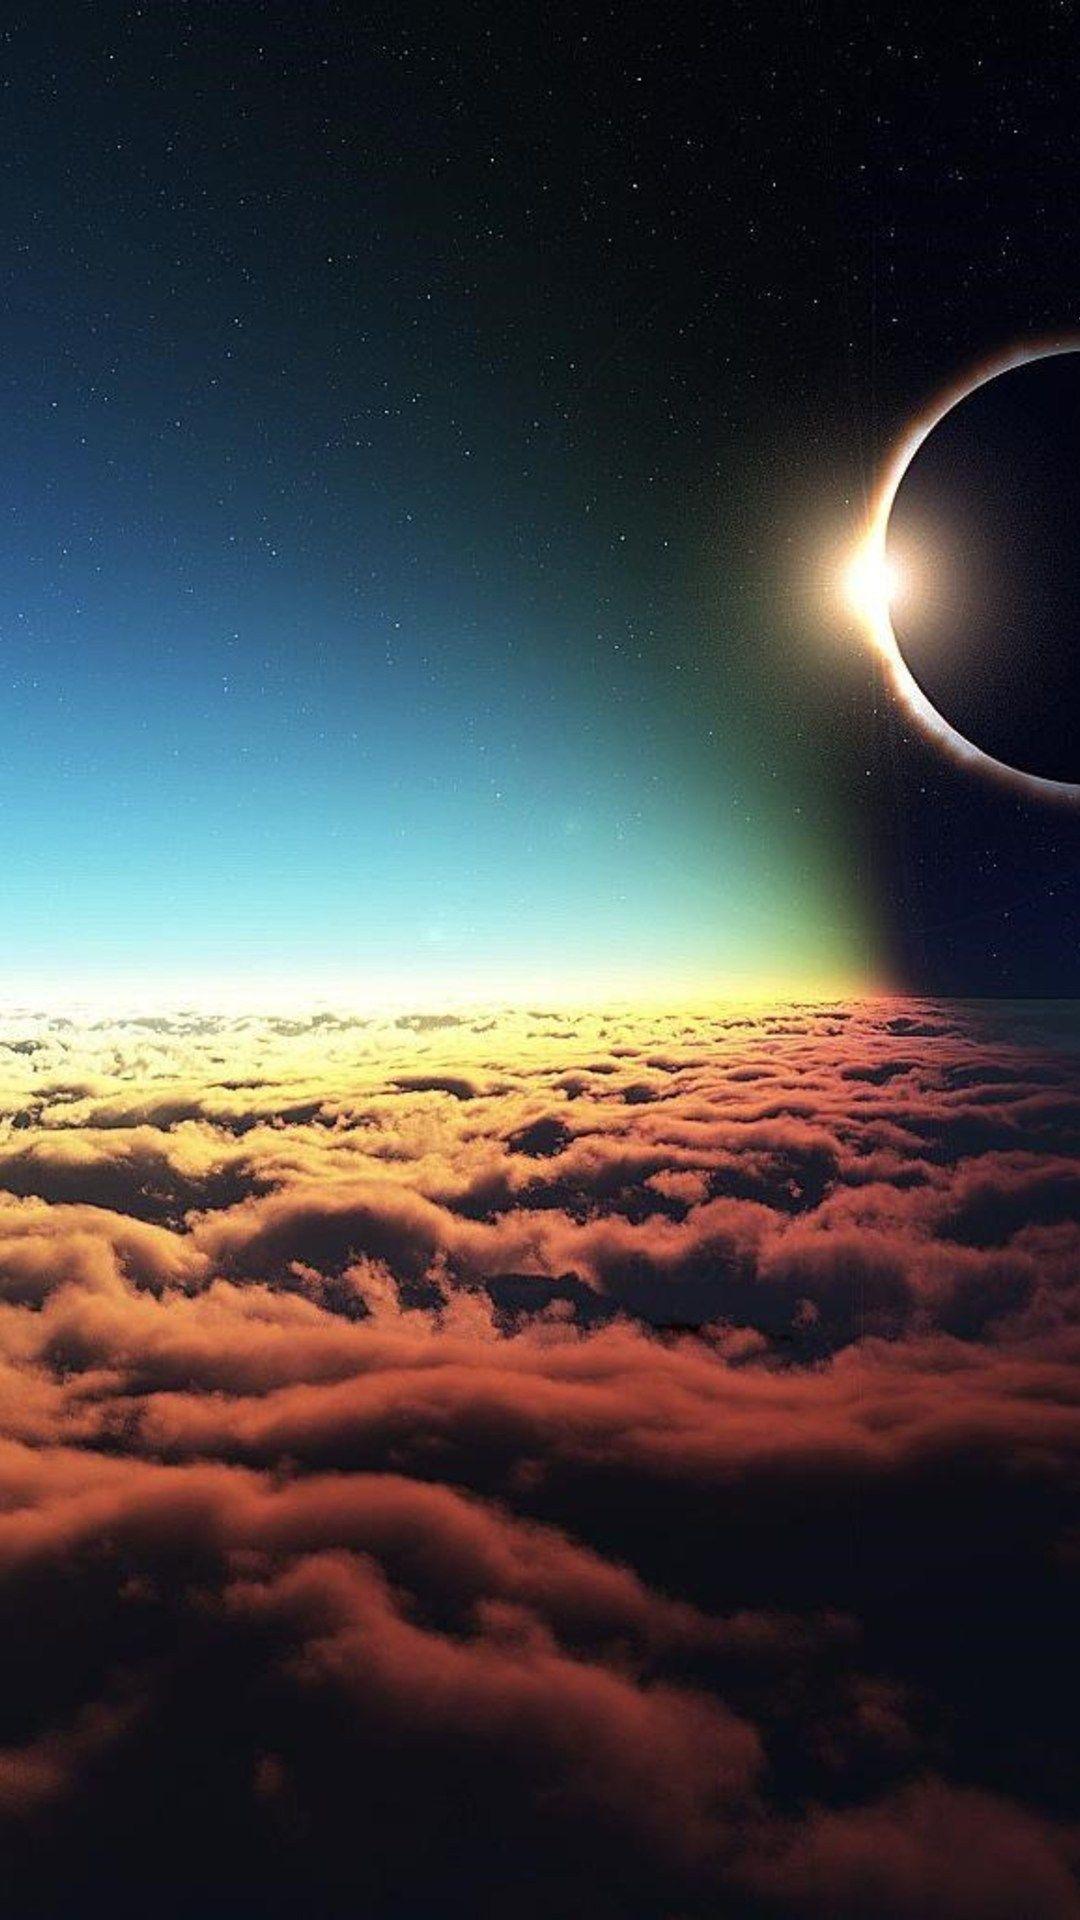 Top 999+ Solar Eclipse Wallpaper Full HD, 4K✓Free to Use